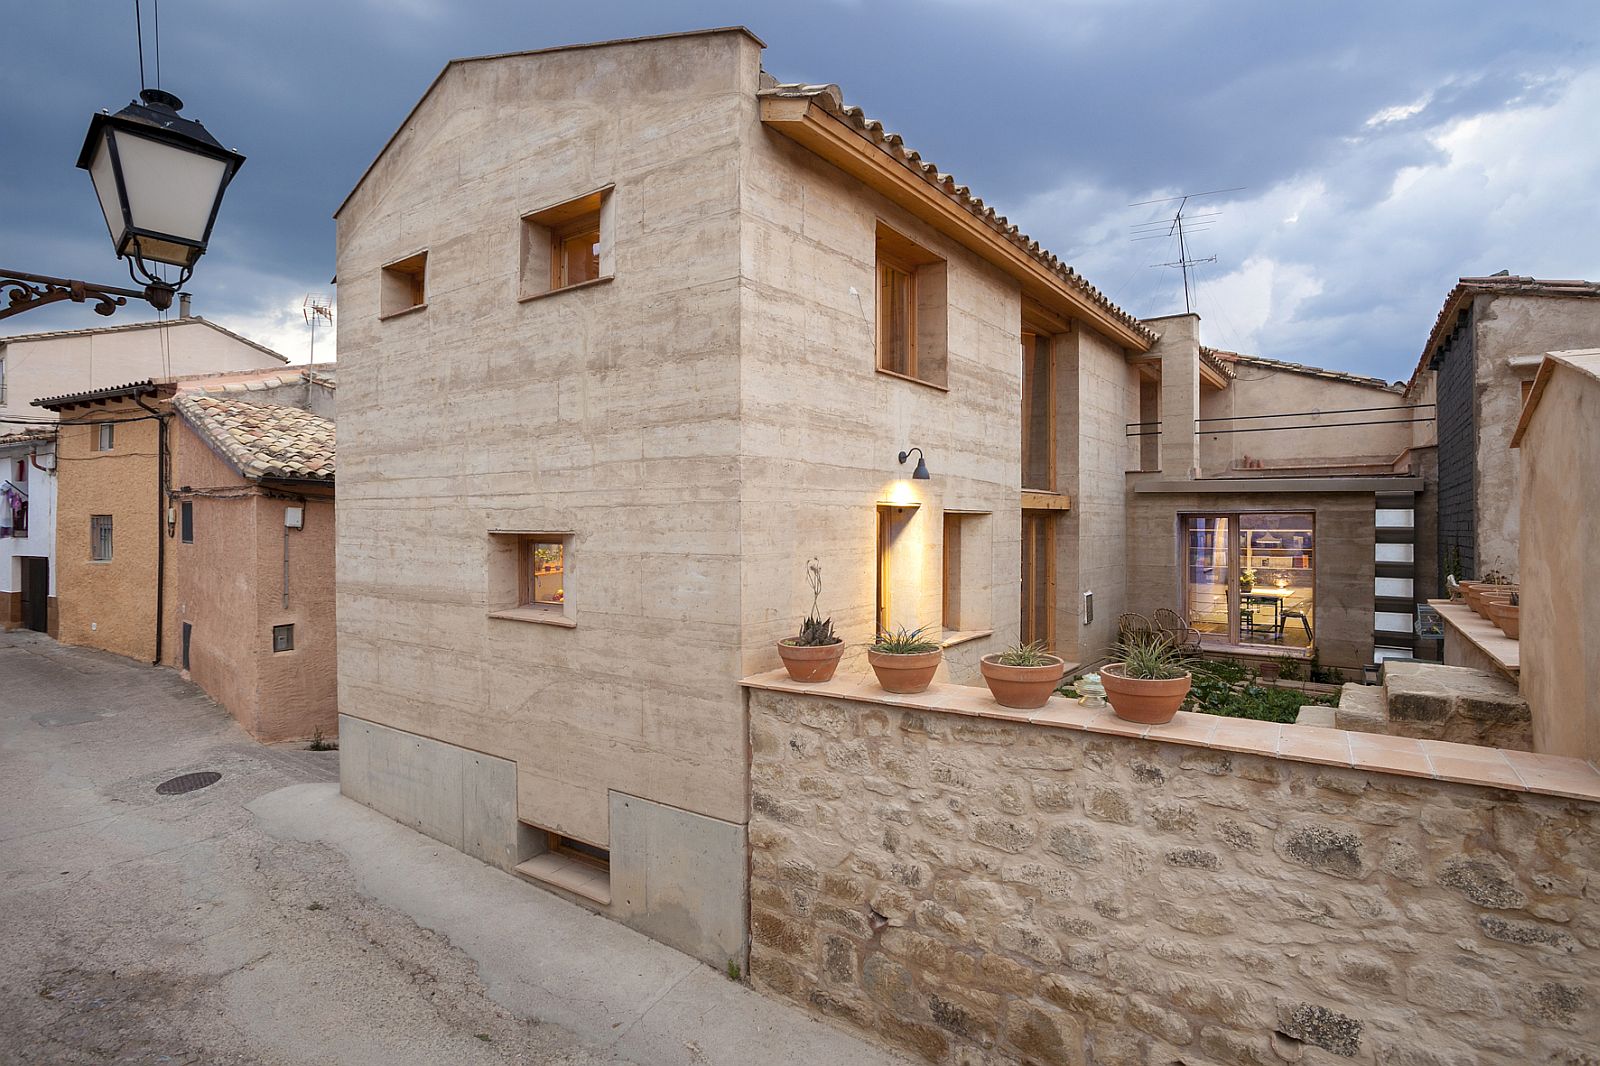 Architectural Revival: Sustainable Rammed Earth House in Spain